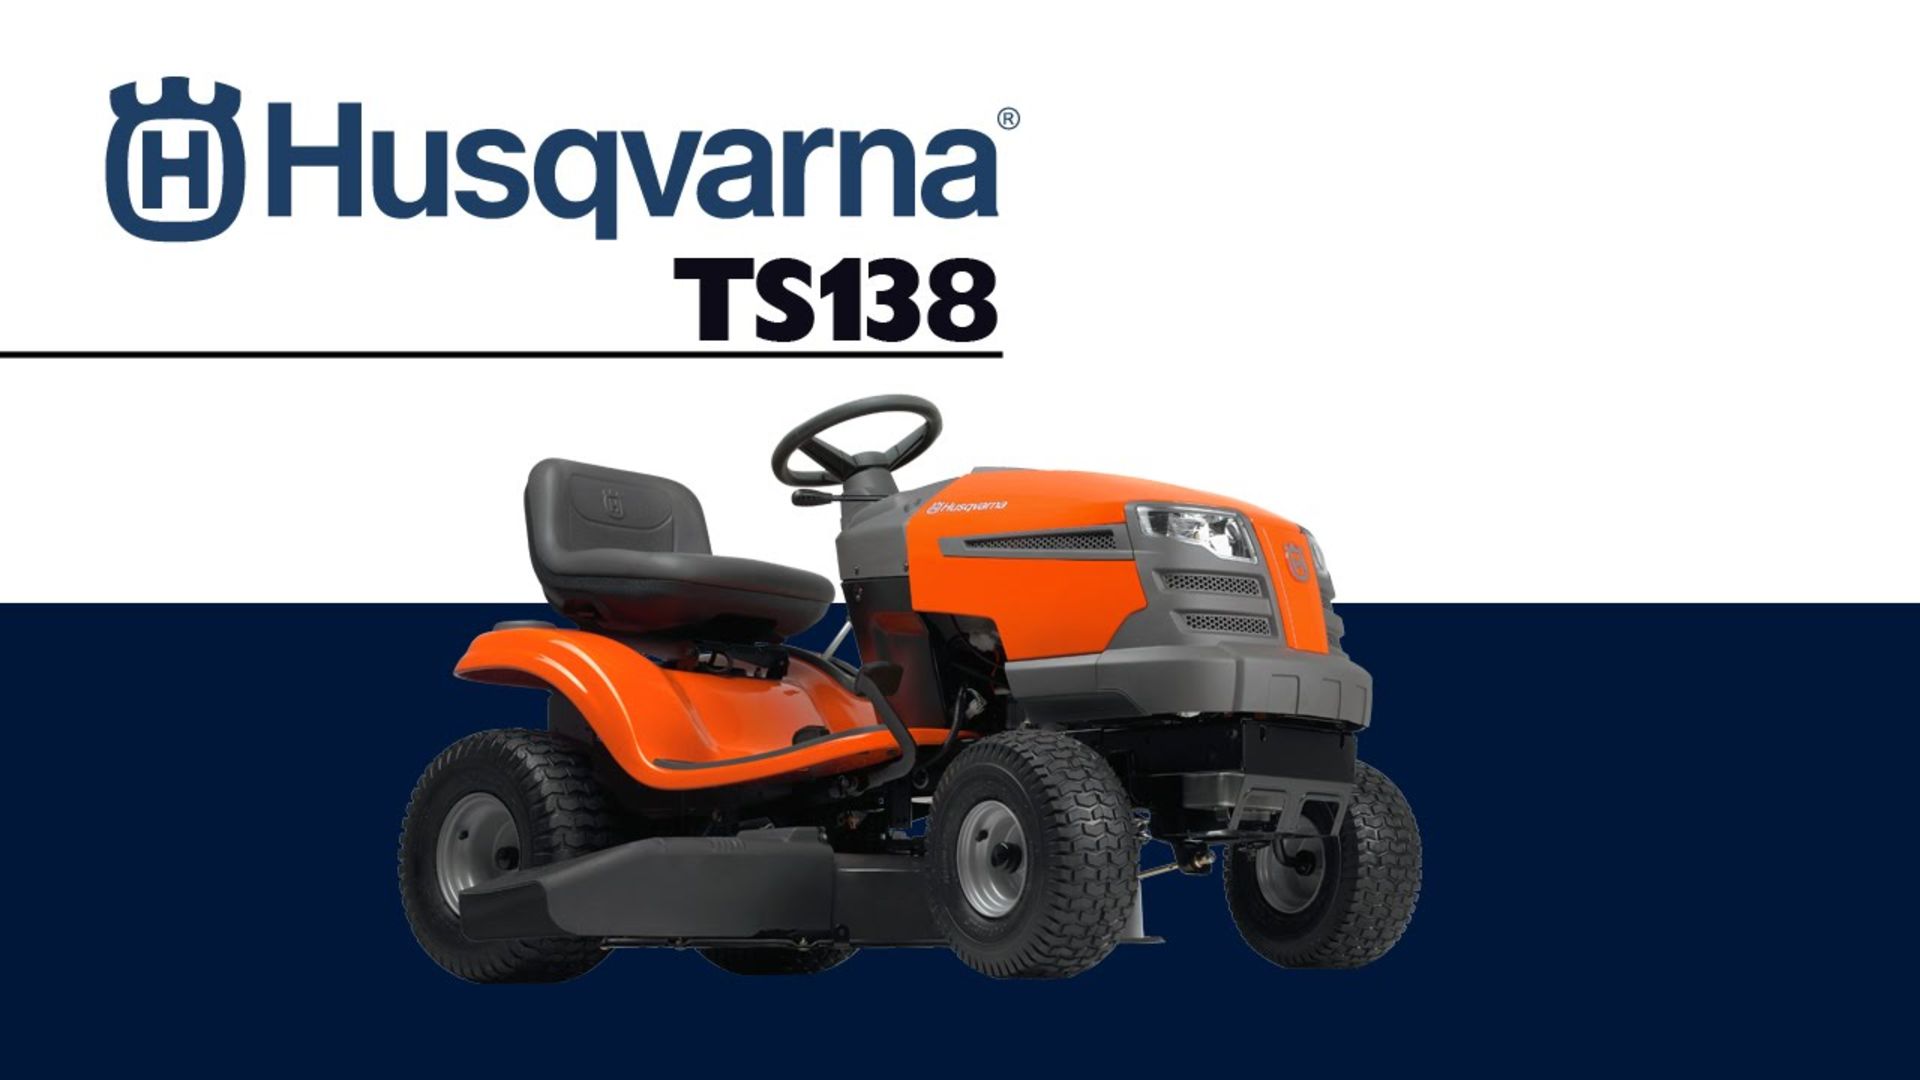 2020 BRAND NEW HUSQVARNA TC138 ROTARY RIDE ON LAWN MOWER (SIDE DISCHARGE) NO COLLECTOR *PLUS VAT*